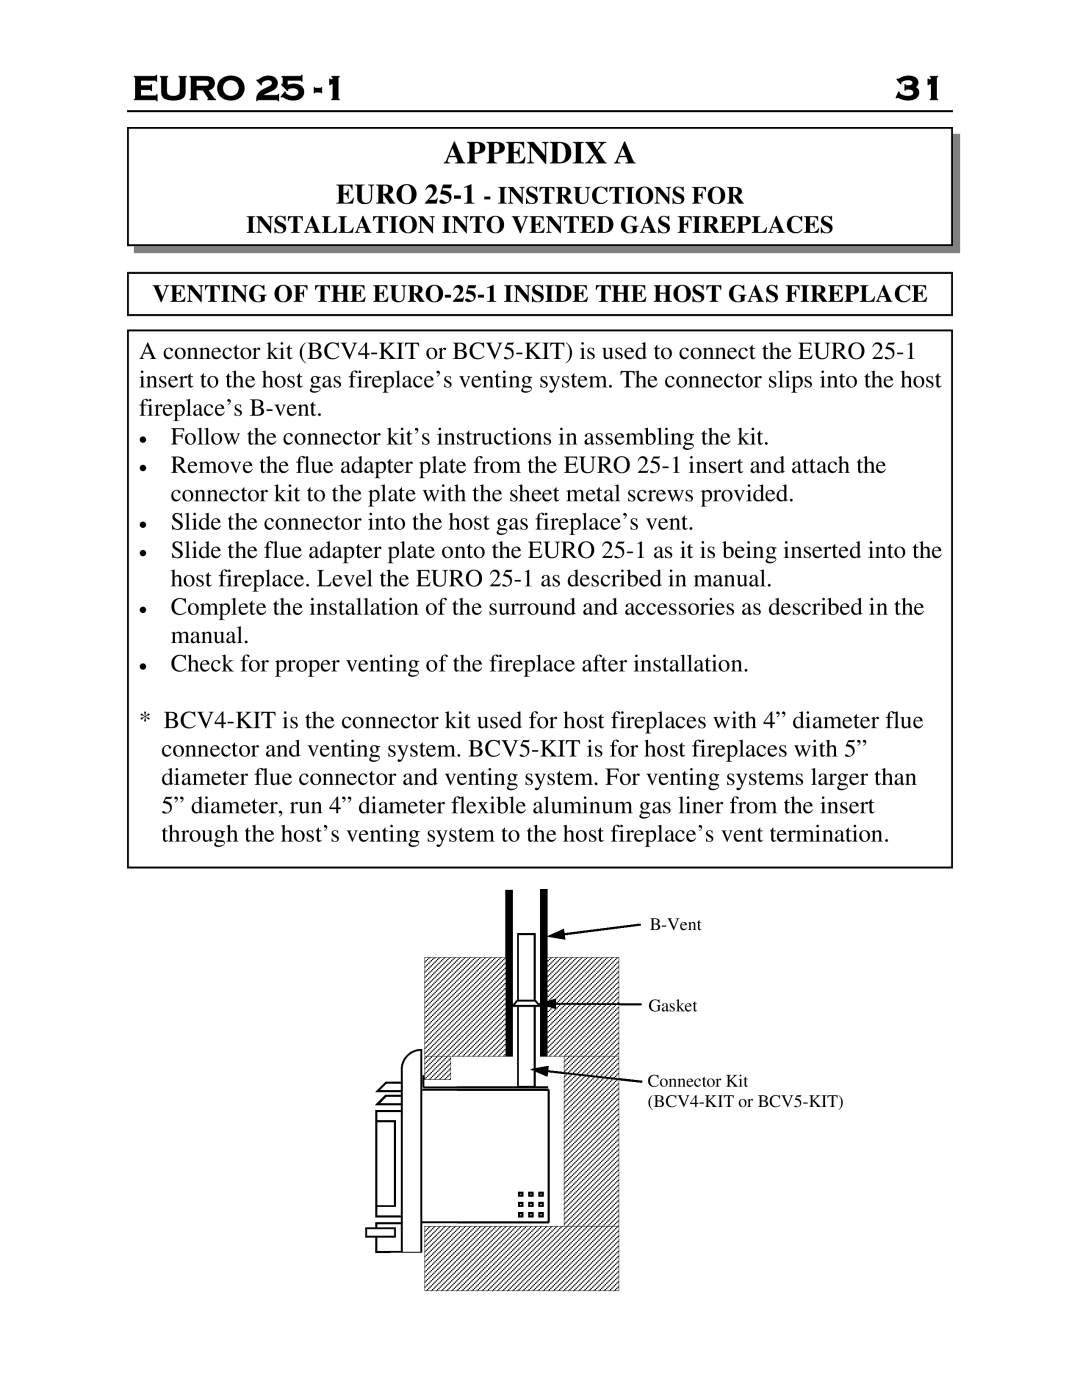 Delkin Devices EI - 25-1 manual Euro, Appendix A, EURO 25-1 - INSTRUCTIONS FOR, Installation Into Vented Gas Fireplaces 